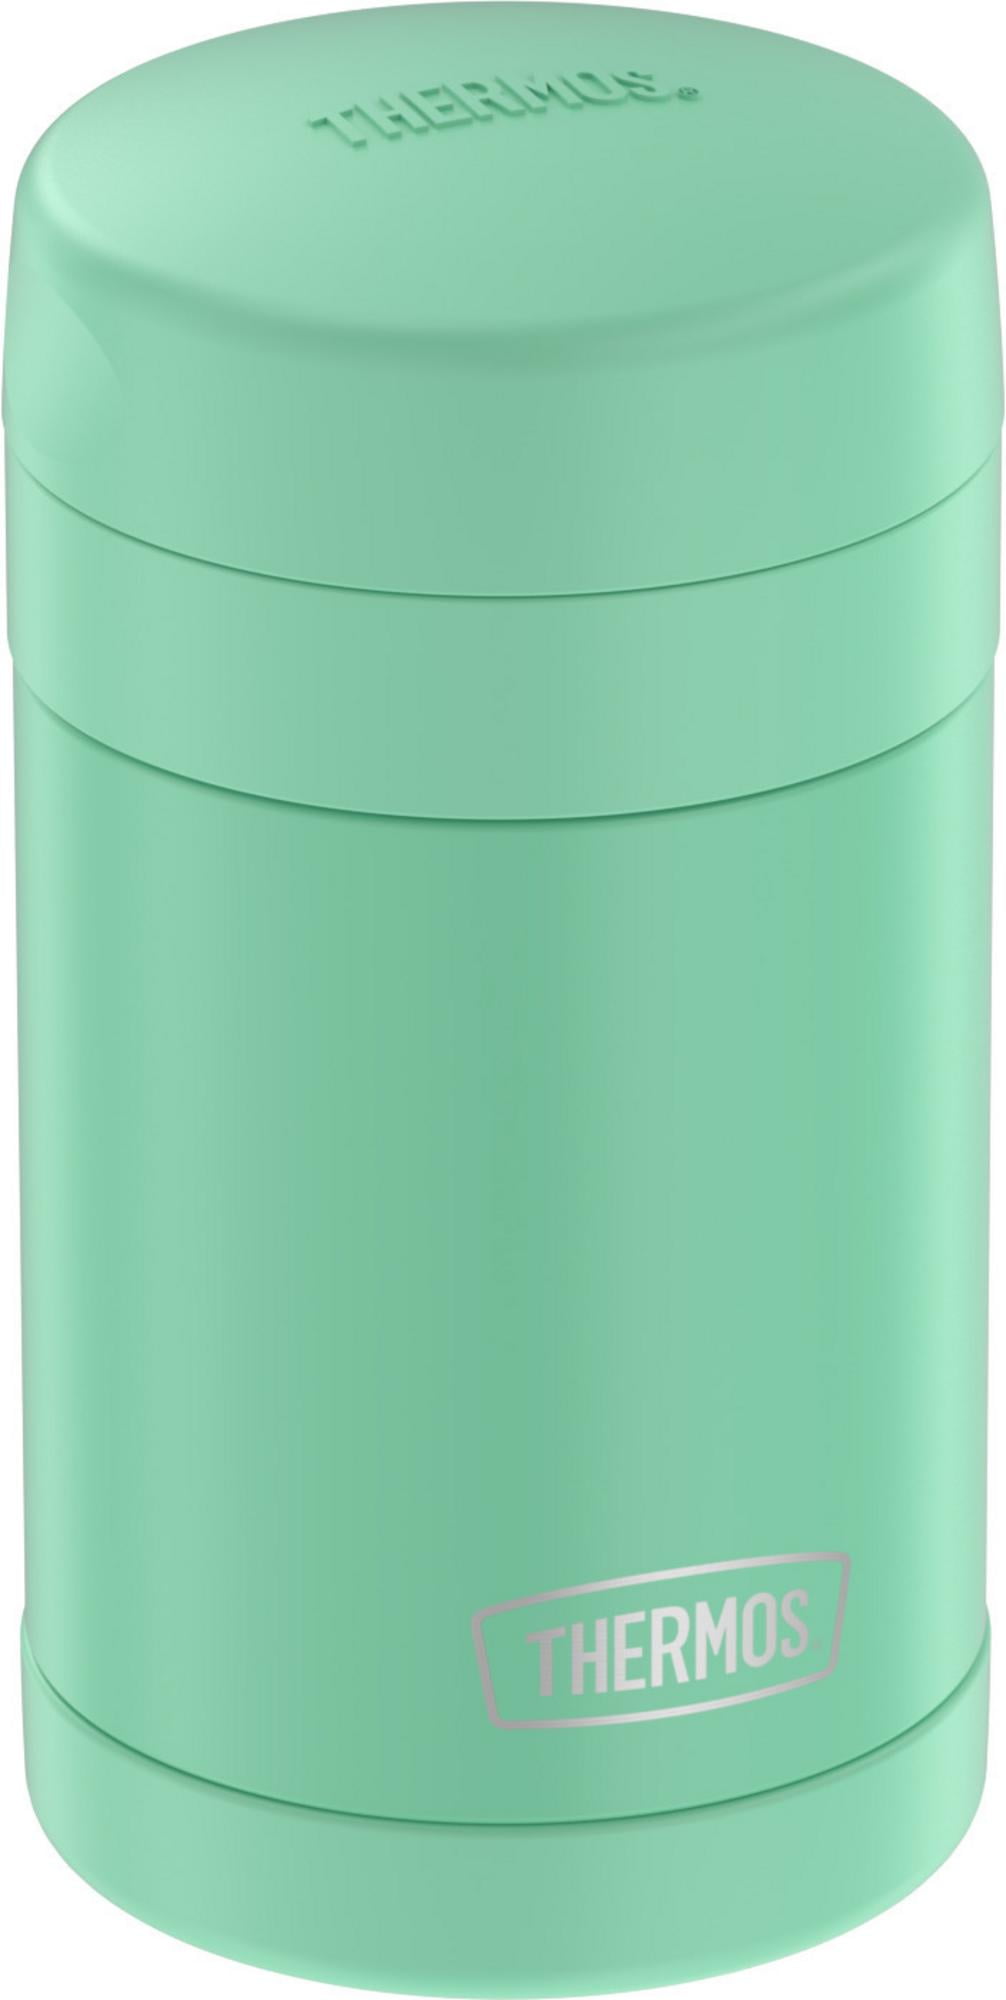  CUPADA Green Square Frog Thermos Food Jar for Hot and